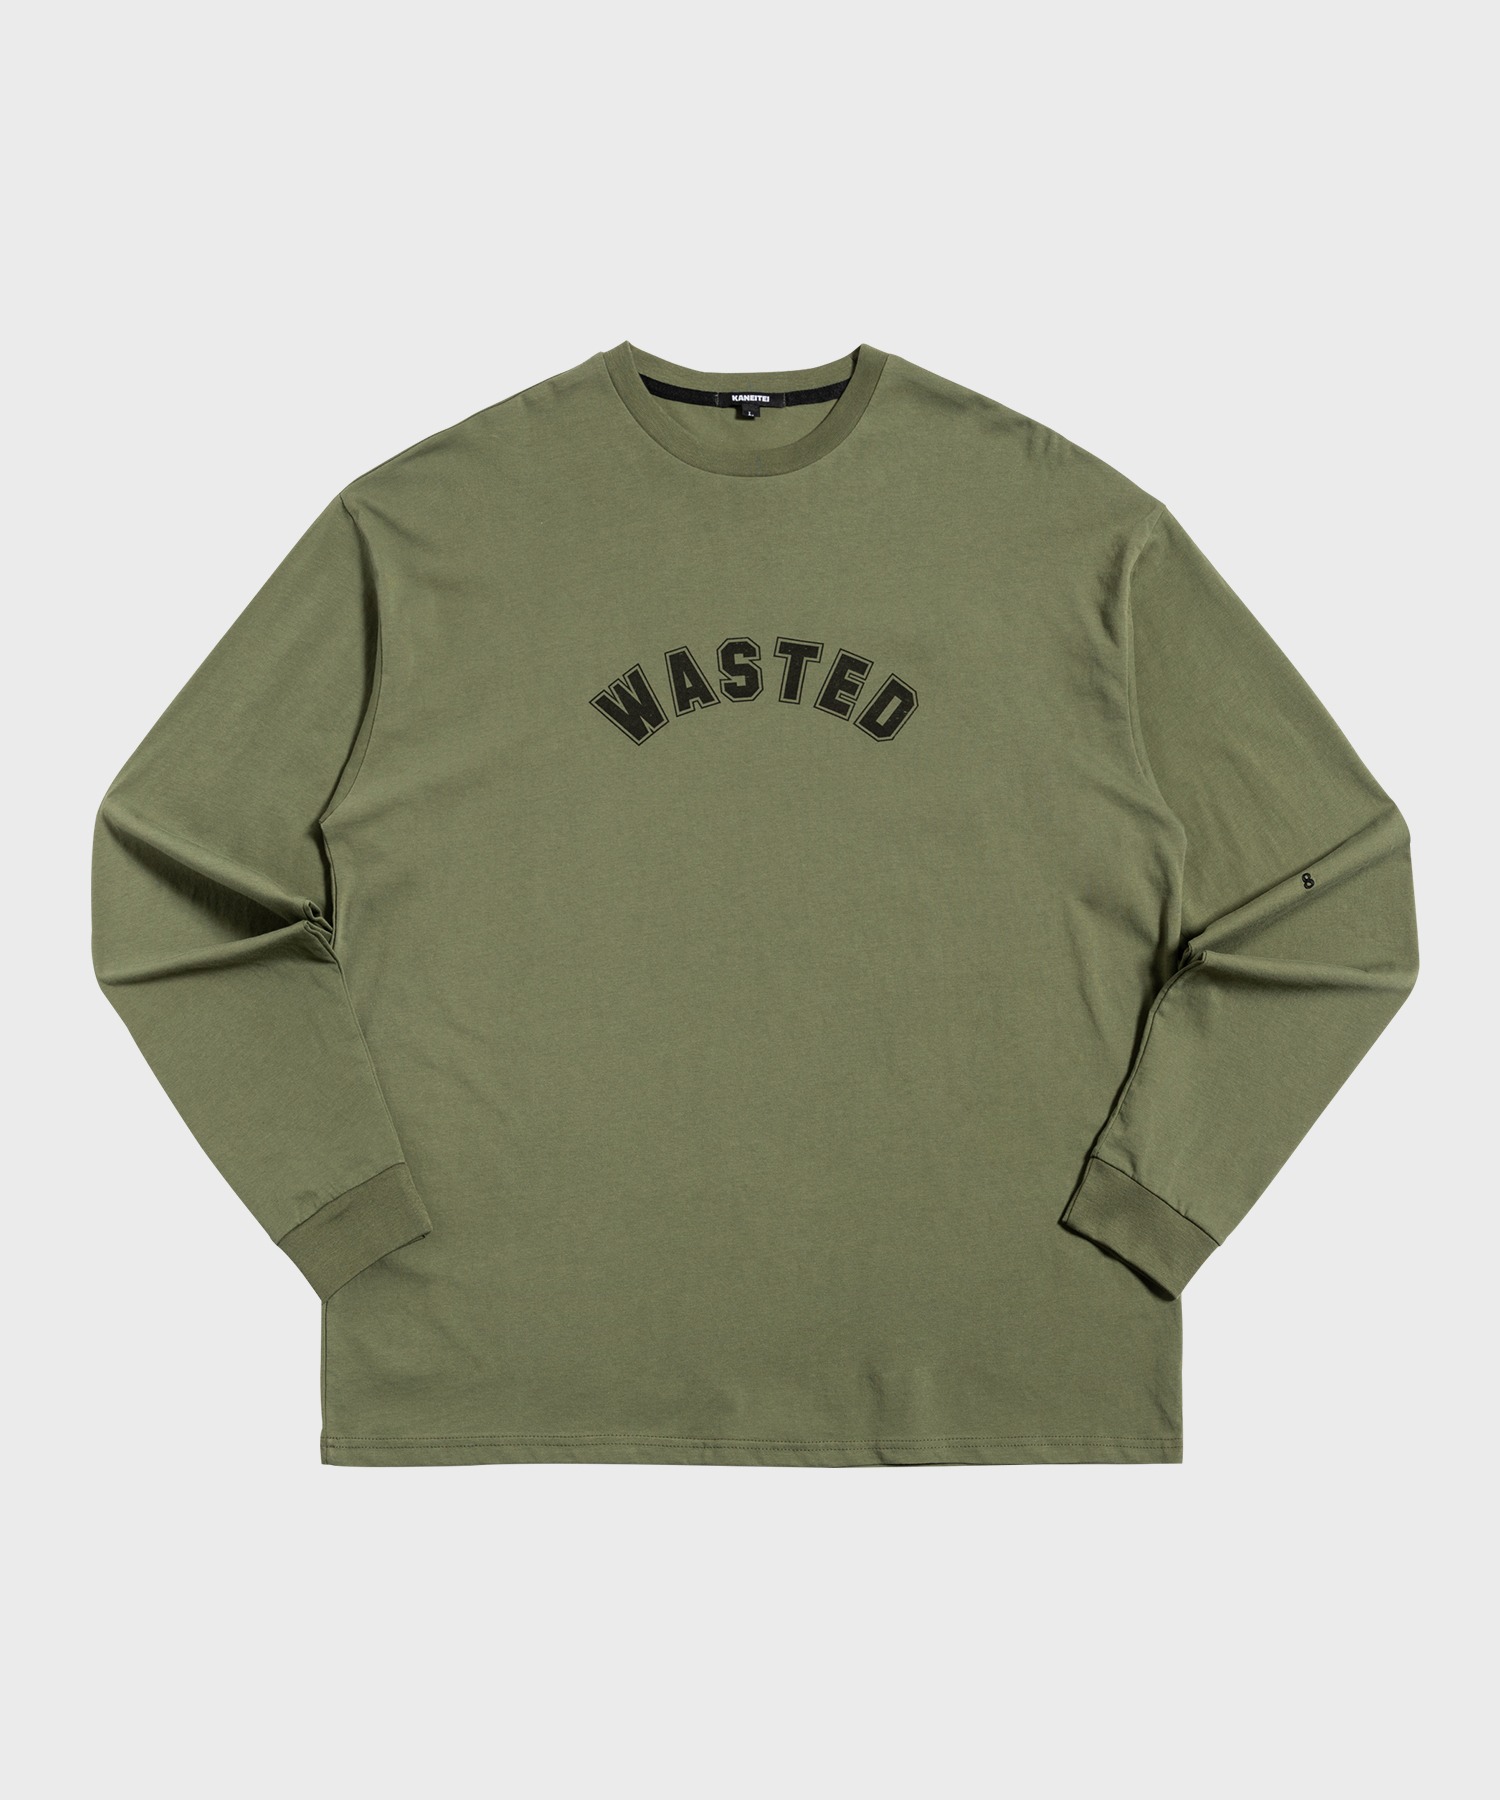 WASTED LONG SLEEVE (OLIVE DRAB)